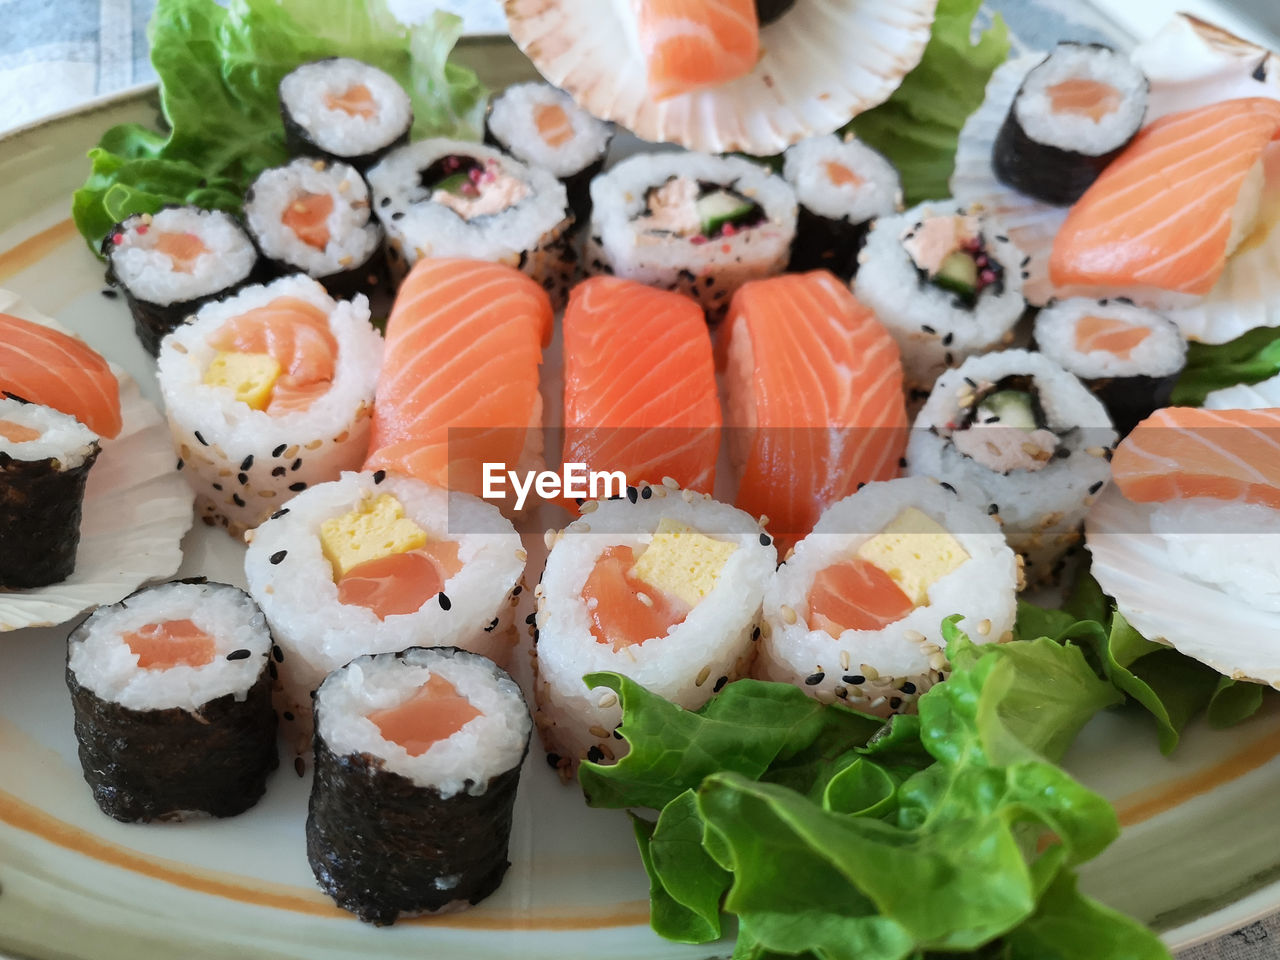 Different types of sushi ready to be tasted.